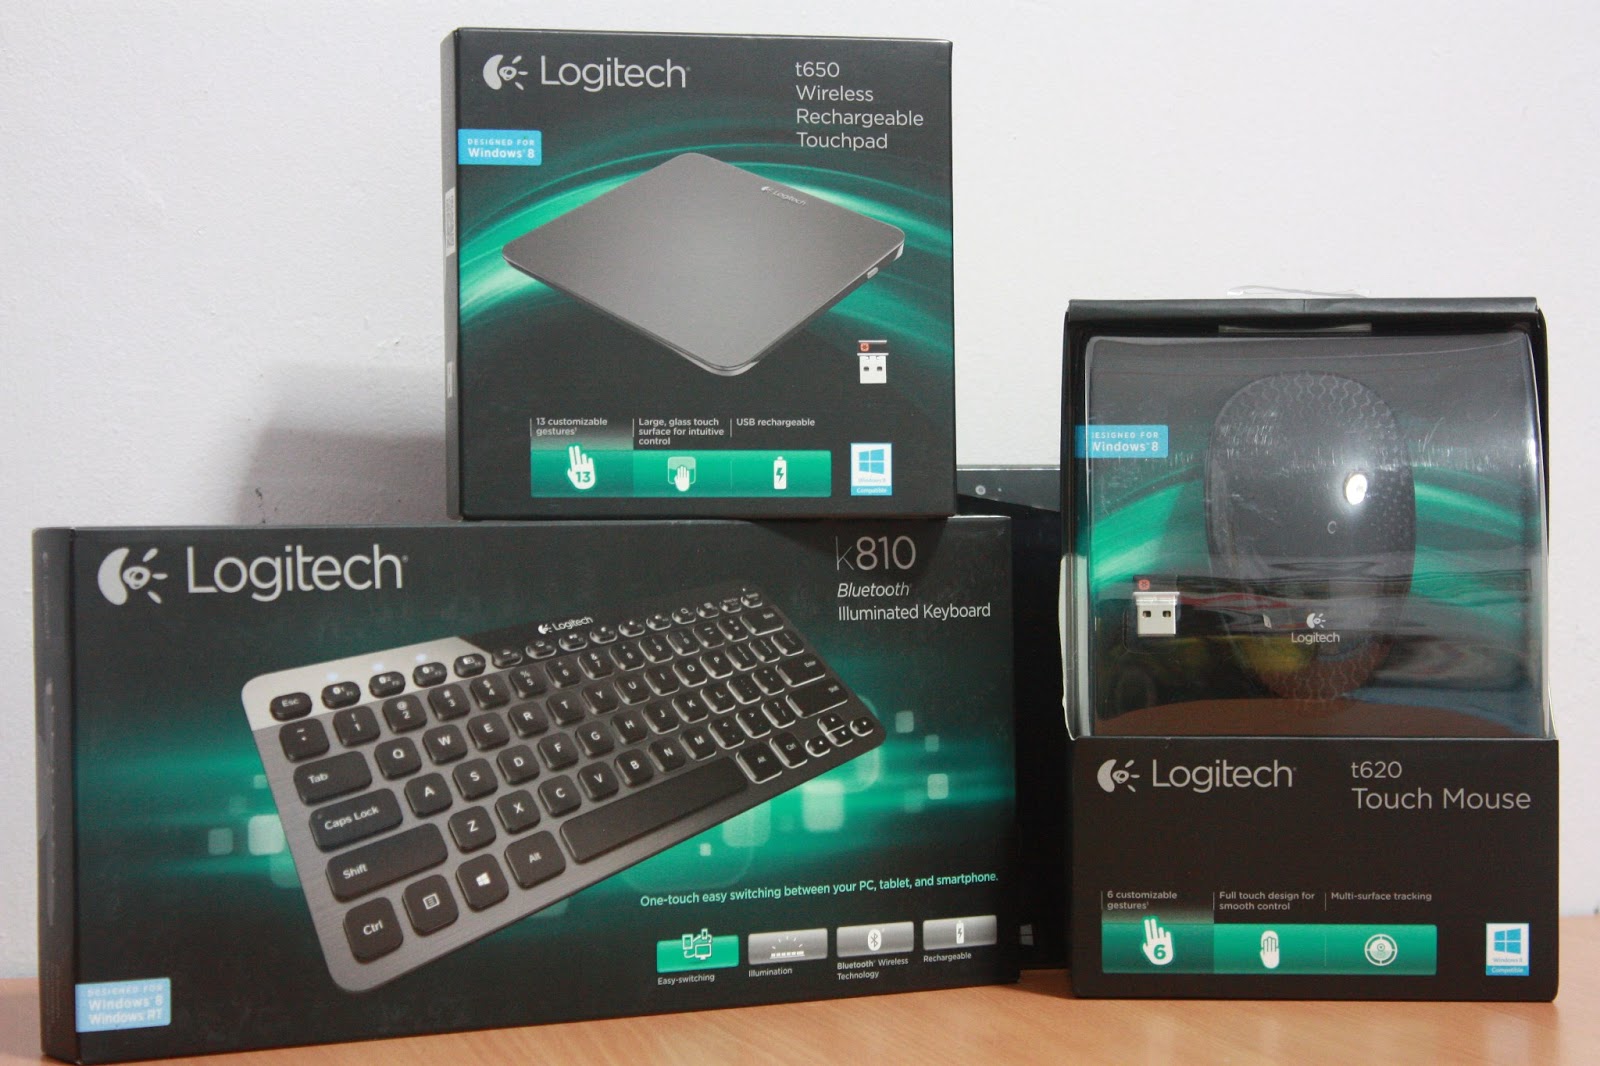 desinfektionsmiddel En begivenhed Flyve drage Be in control with Logitech Peripherals made for Windows 8/RT - The Tech  Revolutionist